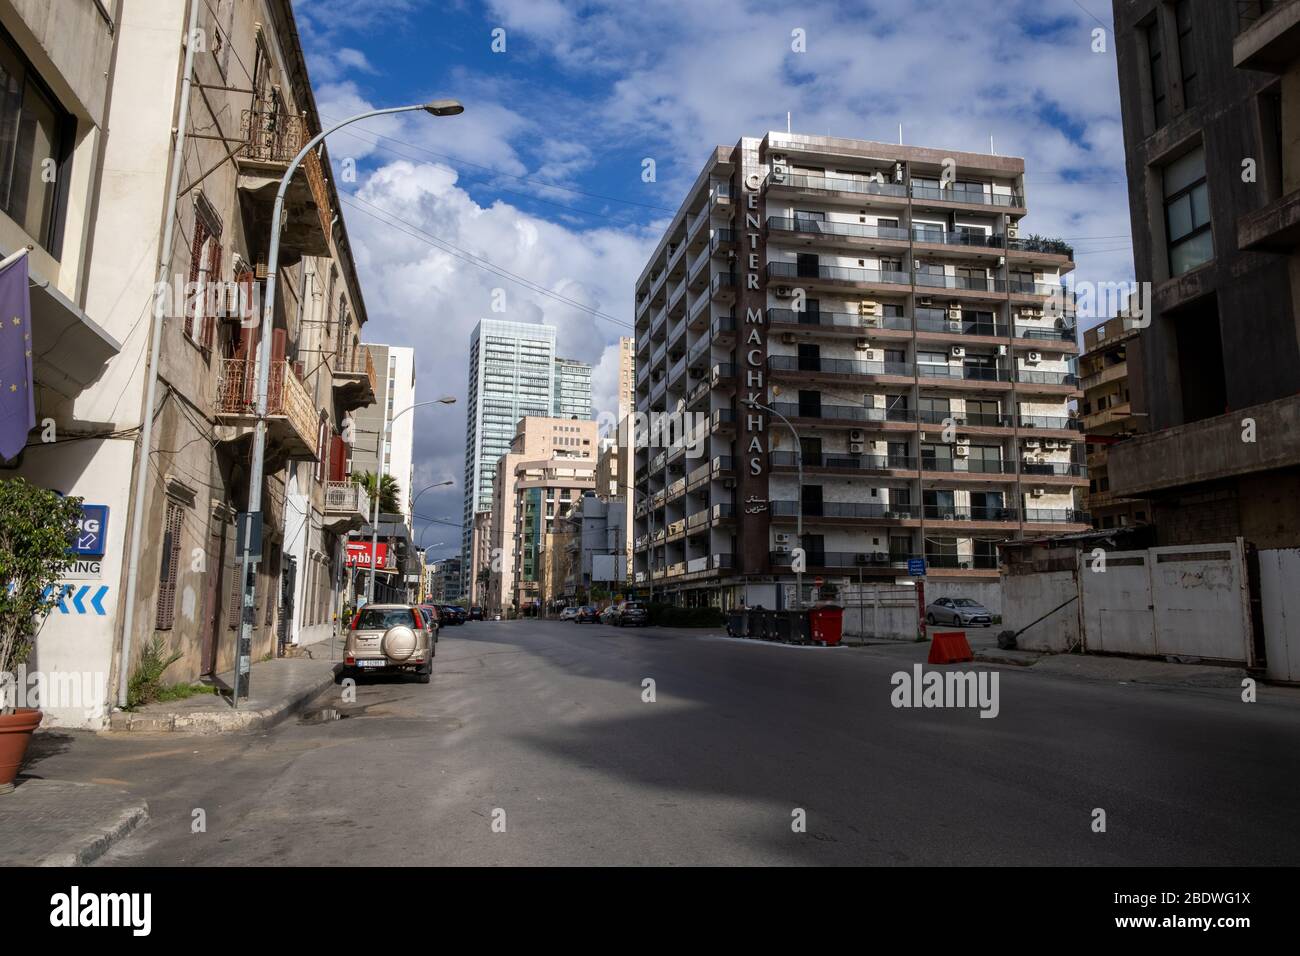 Beirut, Lebanon, 9th April 2020, A large road, usually congested, is completely empty amid the covid19 pandemic in Lebanon ,Hassan Chamoun/Alamy Stock Photo